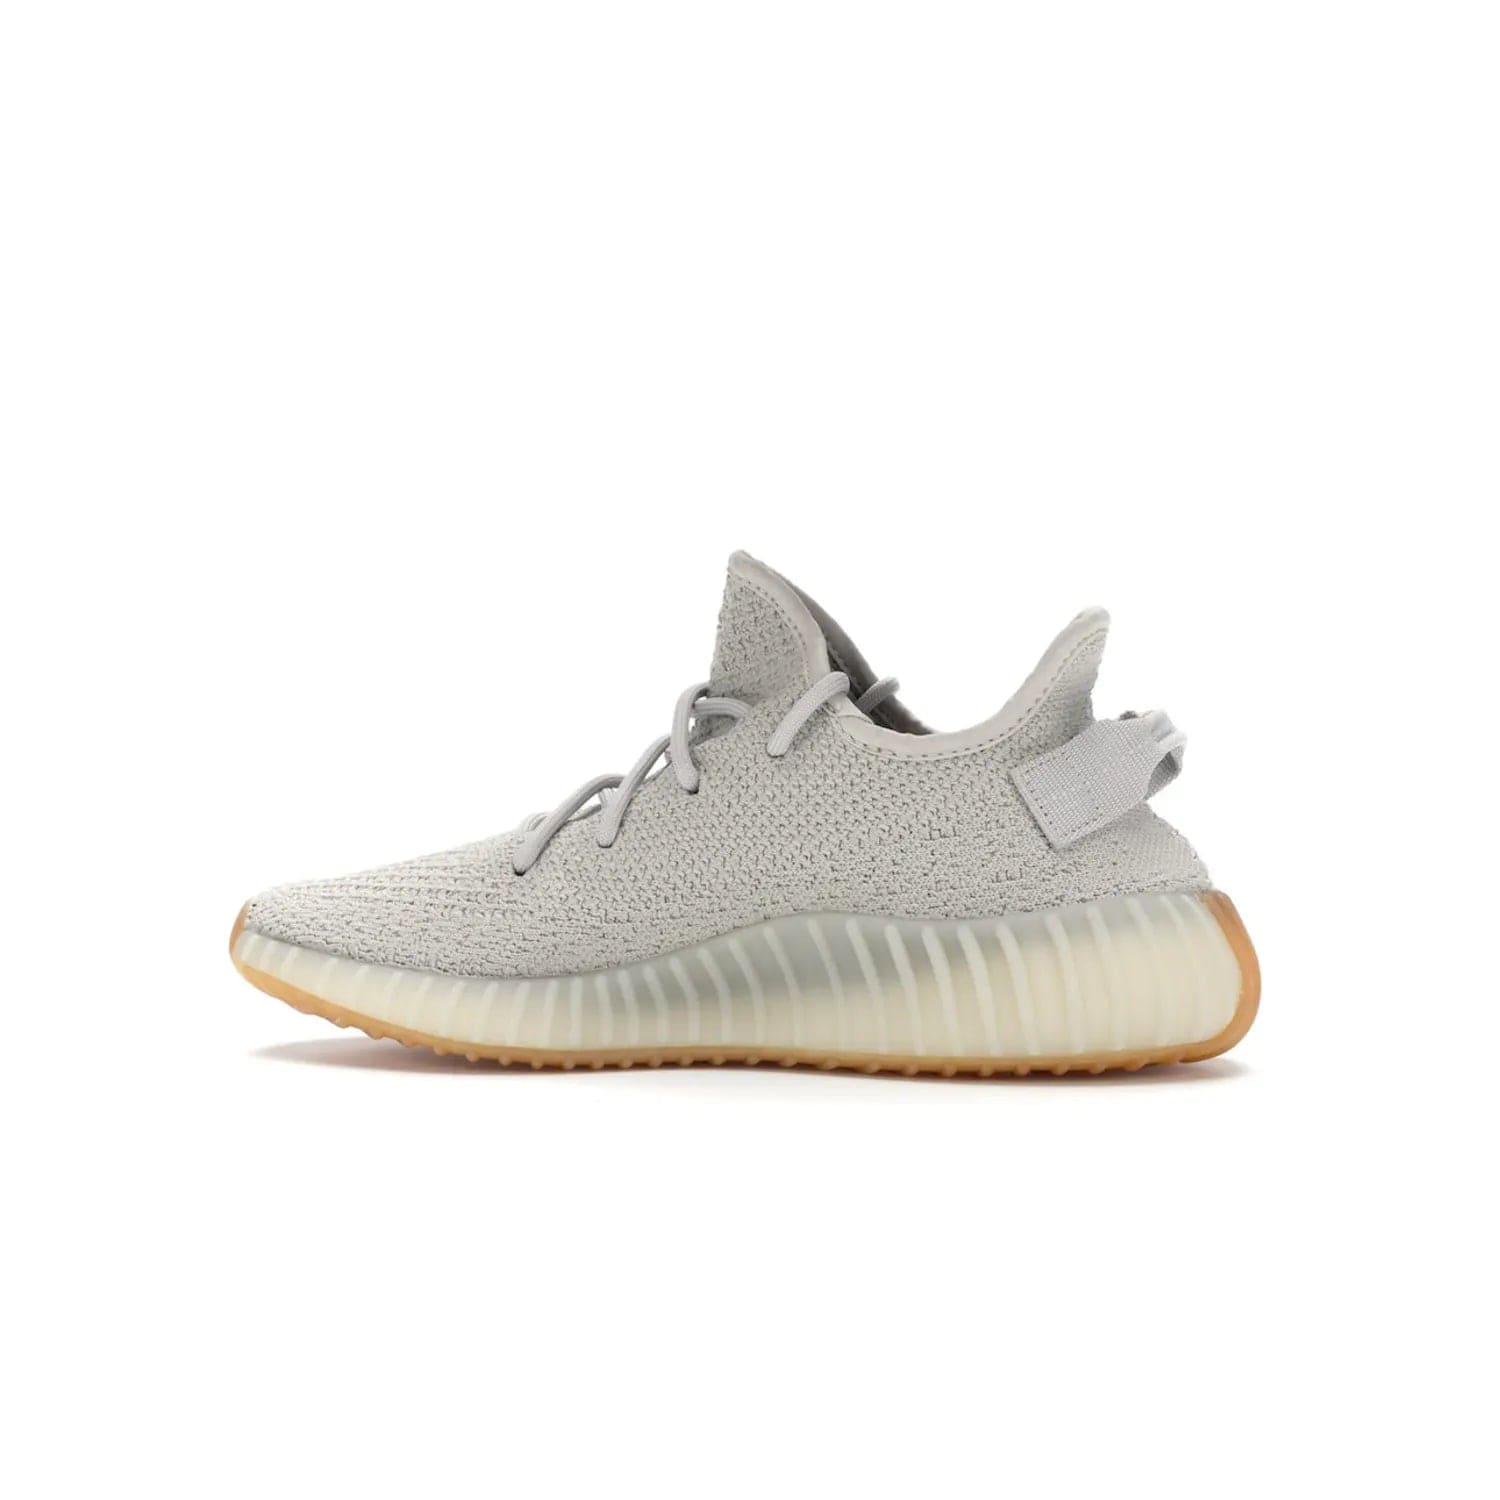 adidas Yeezy Boost 350 V2 Sesame - Image 21 - Only at www.BallersClubKickz.com - Introducing the adidas Yeezy Boost 350 V2 Sesame. Featuring a sesame upper, midsole and gum sole for a sleek silhouette. Cop the stylish sneaker released in November 2018.